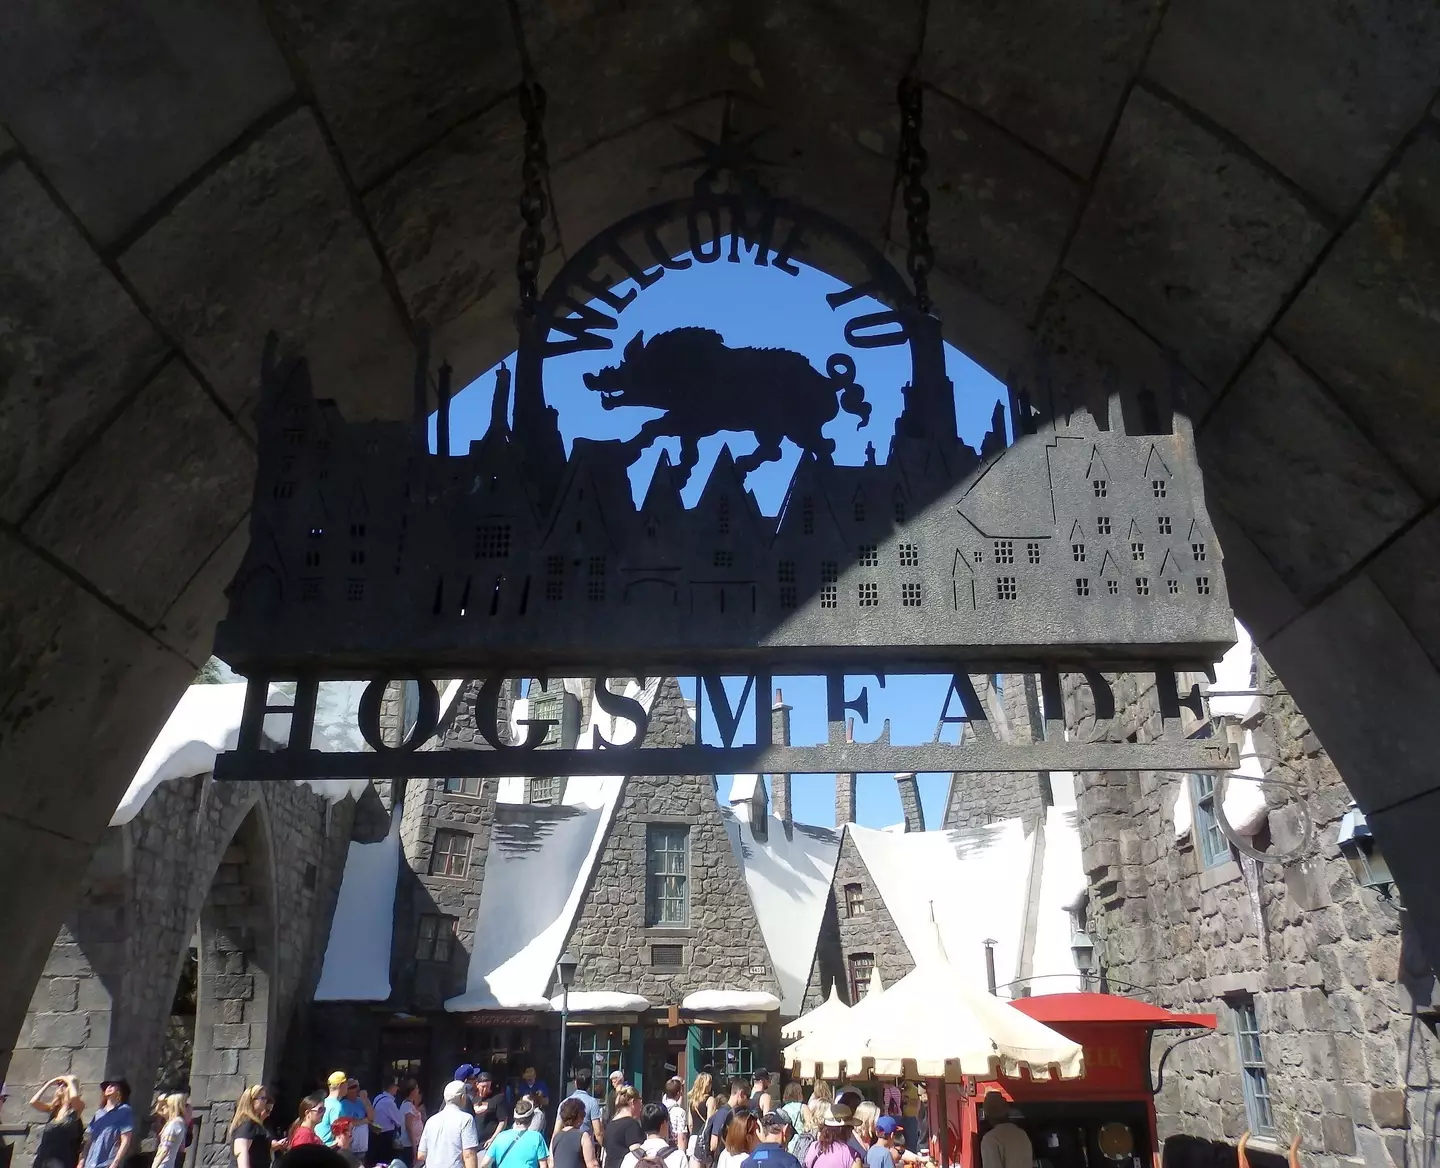 Potter fans will also be able to visit Hogsmeade.